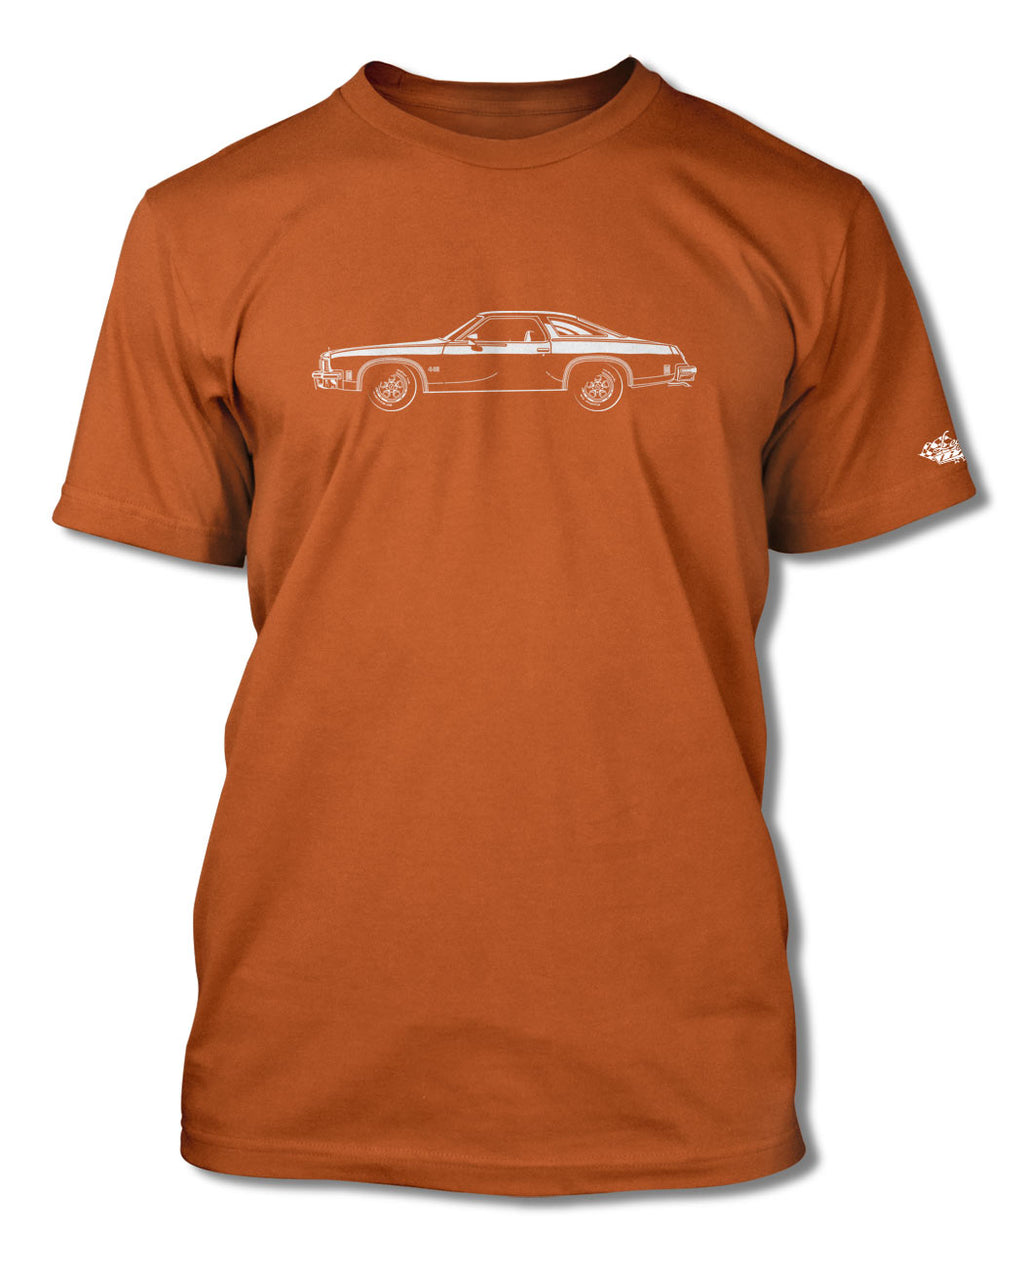 1975 Oldsmobile Cutlass 4-4-2 Coupe with Stripes T-Shirt - Men - Side View